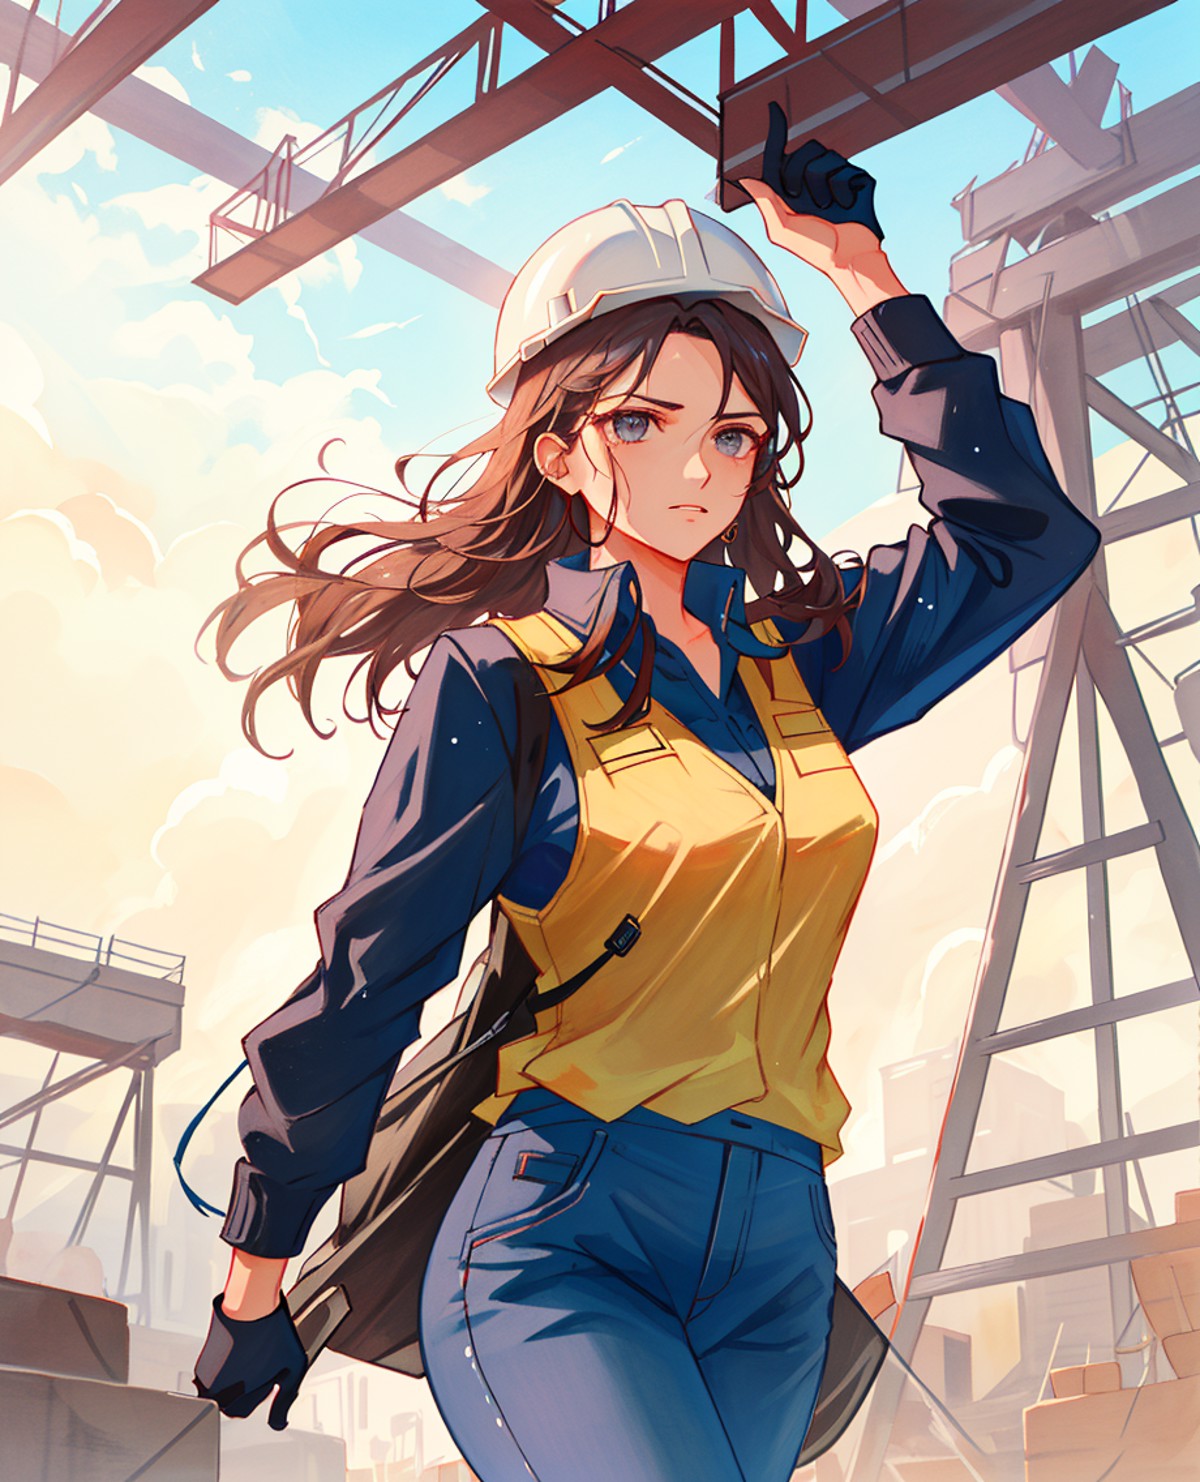 In this powerful cowboy_shot, we see a female construction worker wearing a sturdy hardhat amidst a backdrop of steel beam...